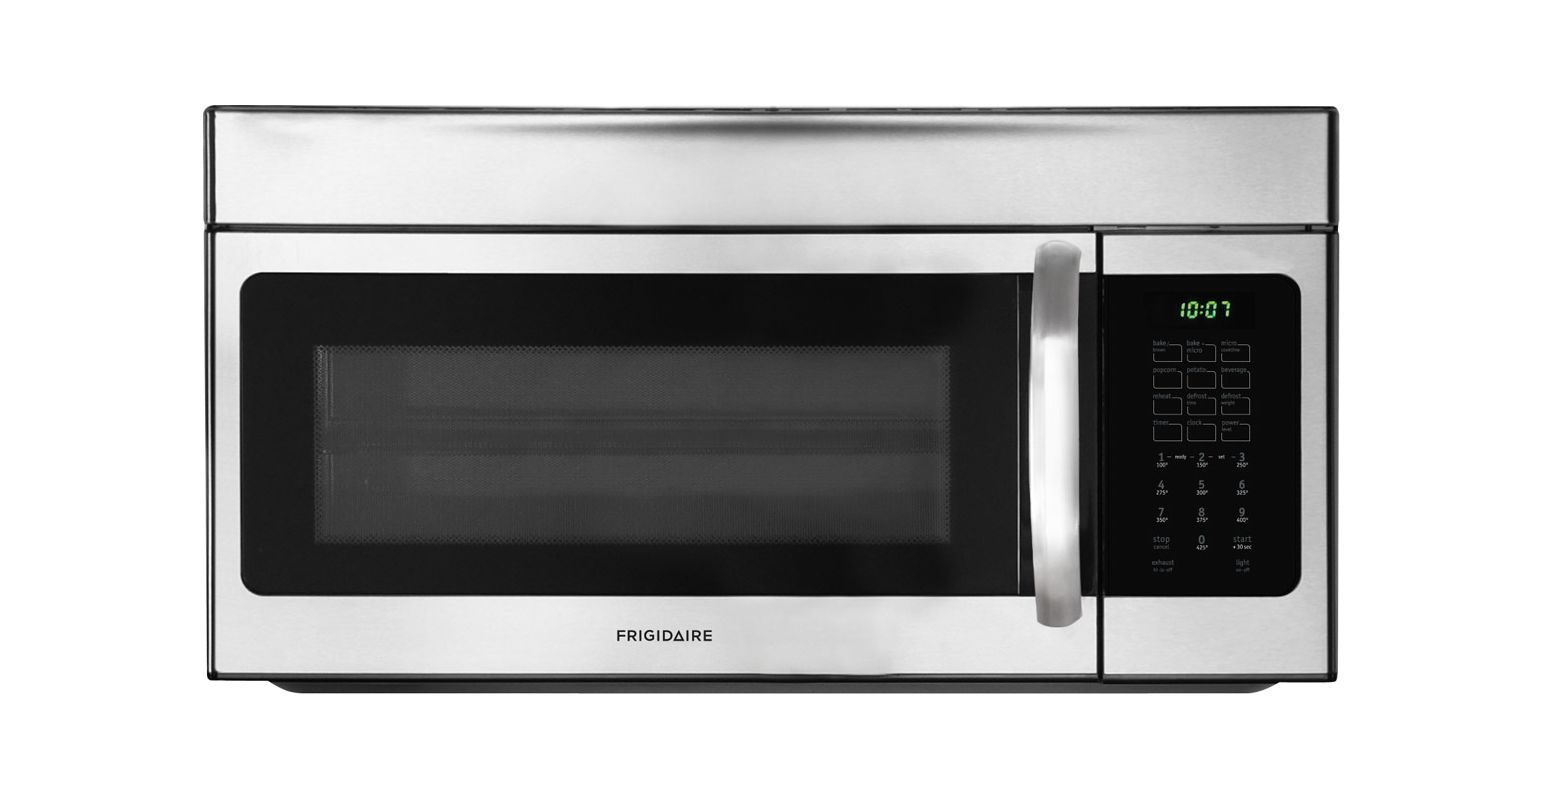 Frigidaire FFMV154CLS Stainless Steel 1.5 Cubic Foot Over-The-Range